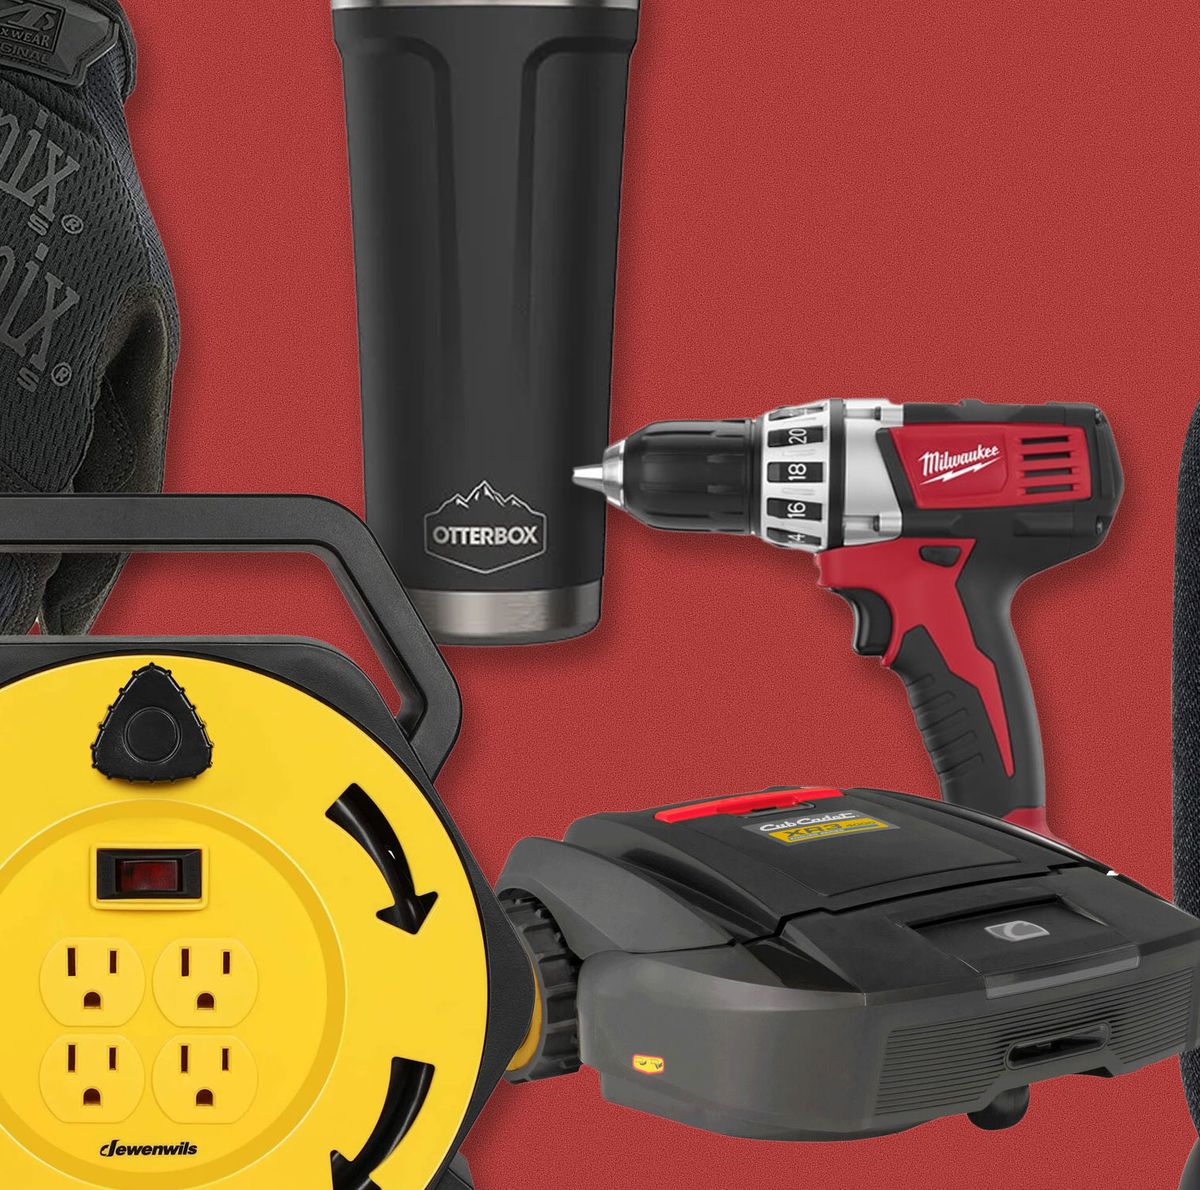 45 Helpful Garage Gifts For Dads To Increase Their Efficiency